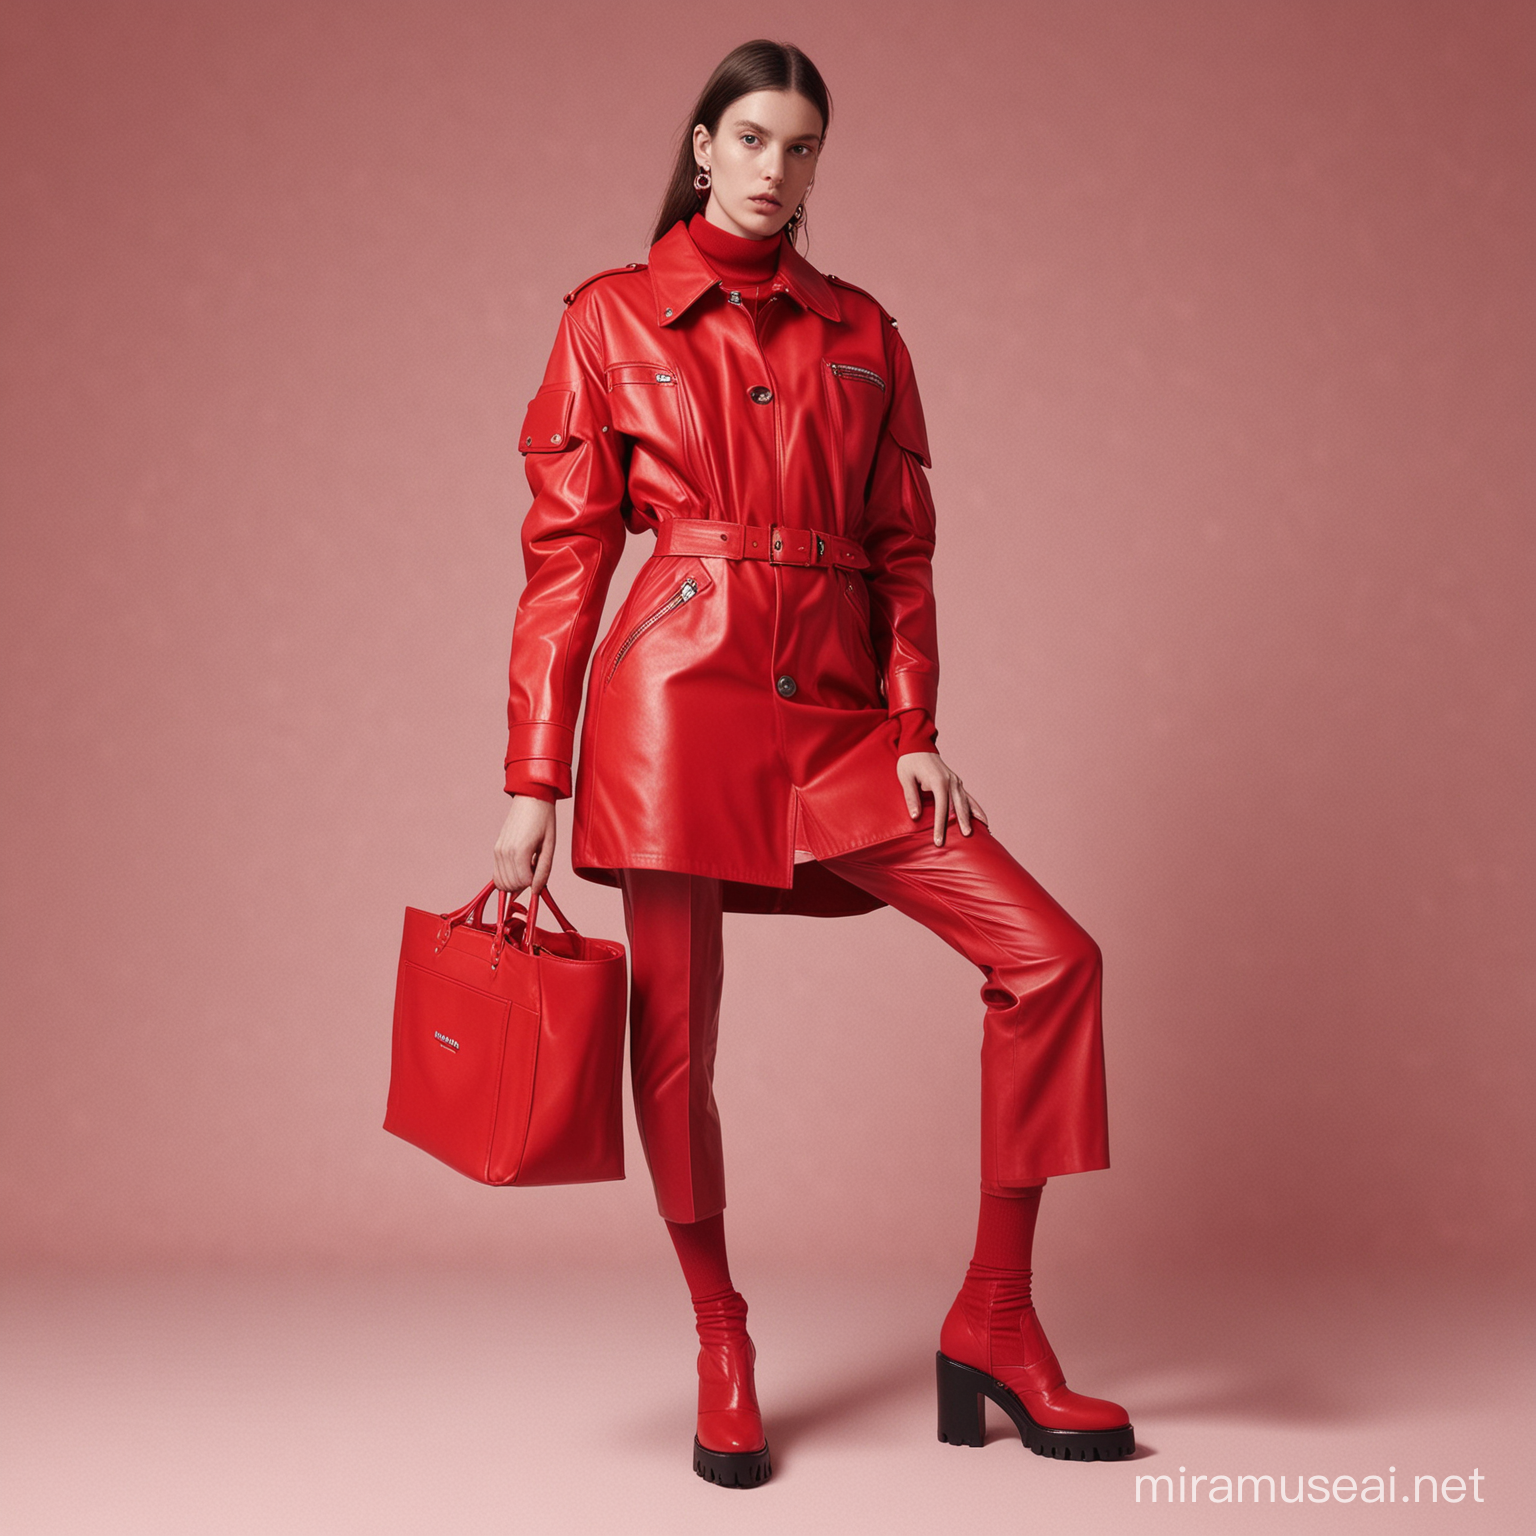 Show me a balenciaga campaign. The model is wearing balenciaga clothes. The picture has to be minimalistic. The set of the pictures  is red. 